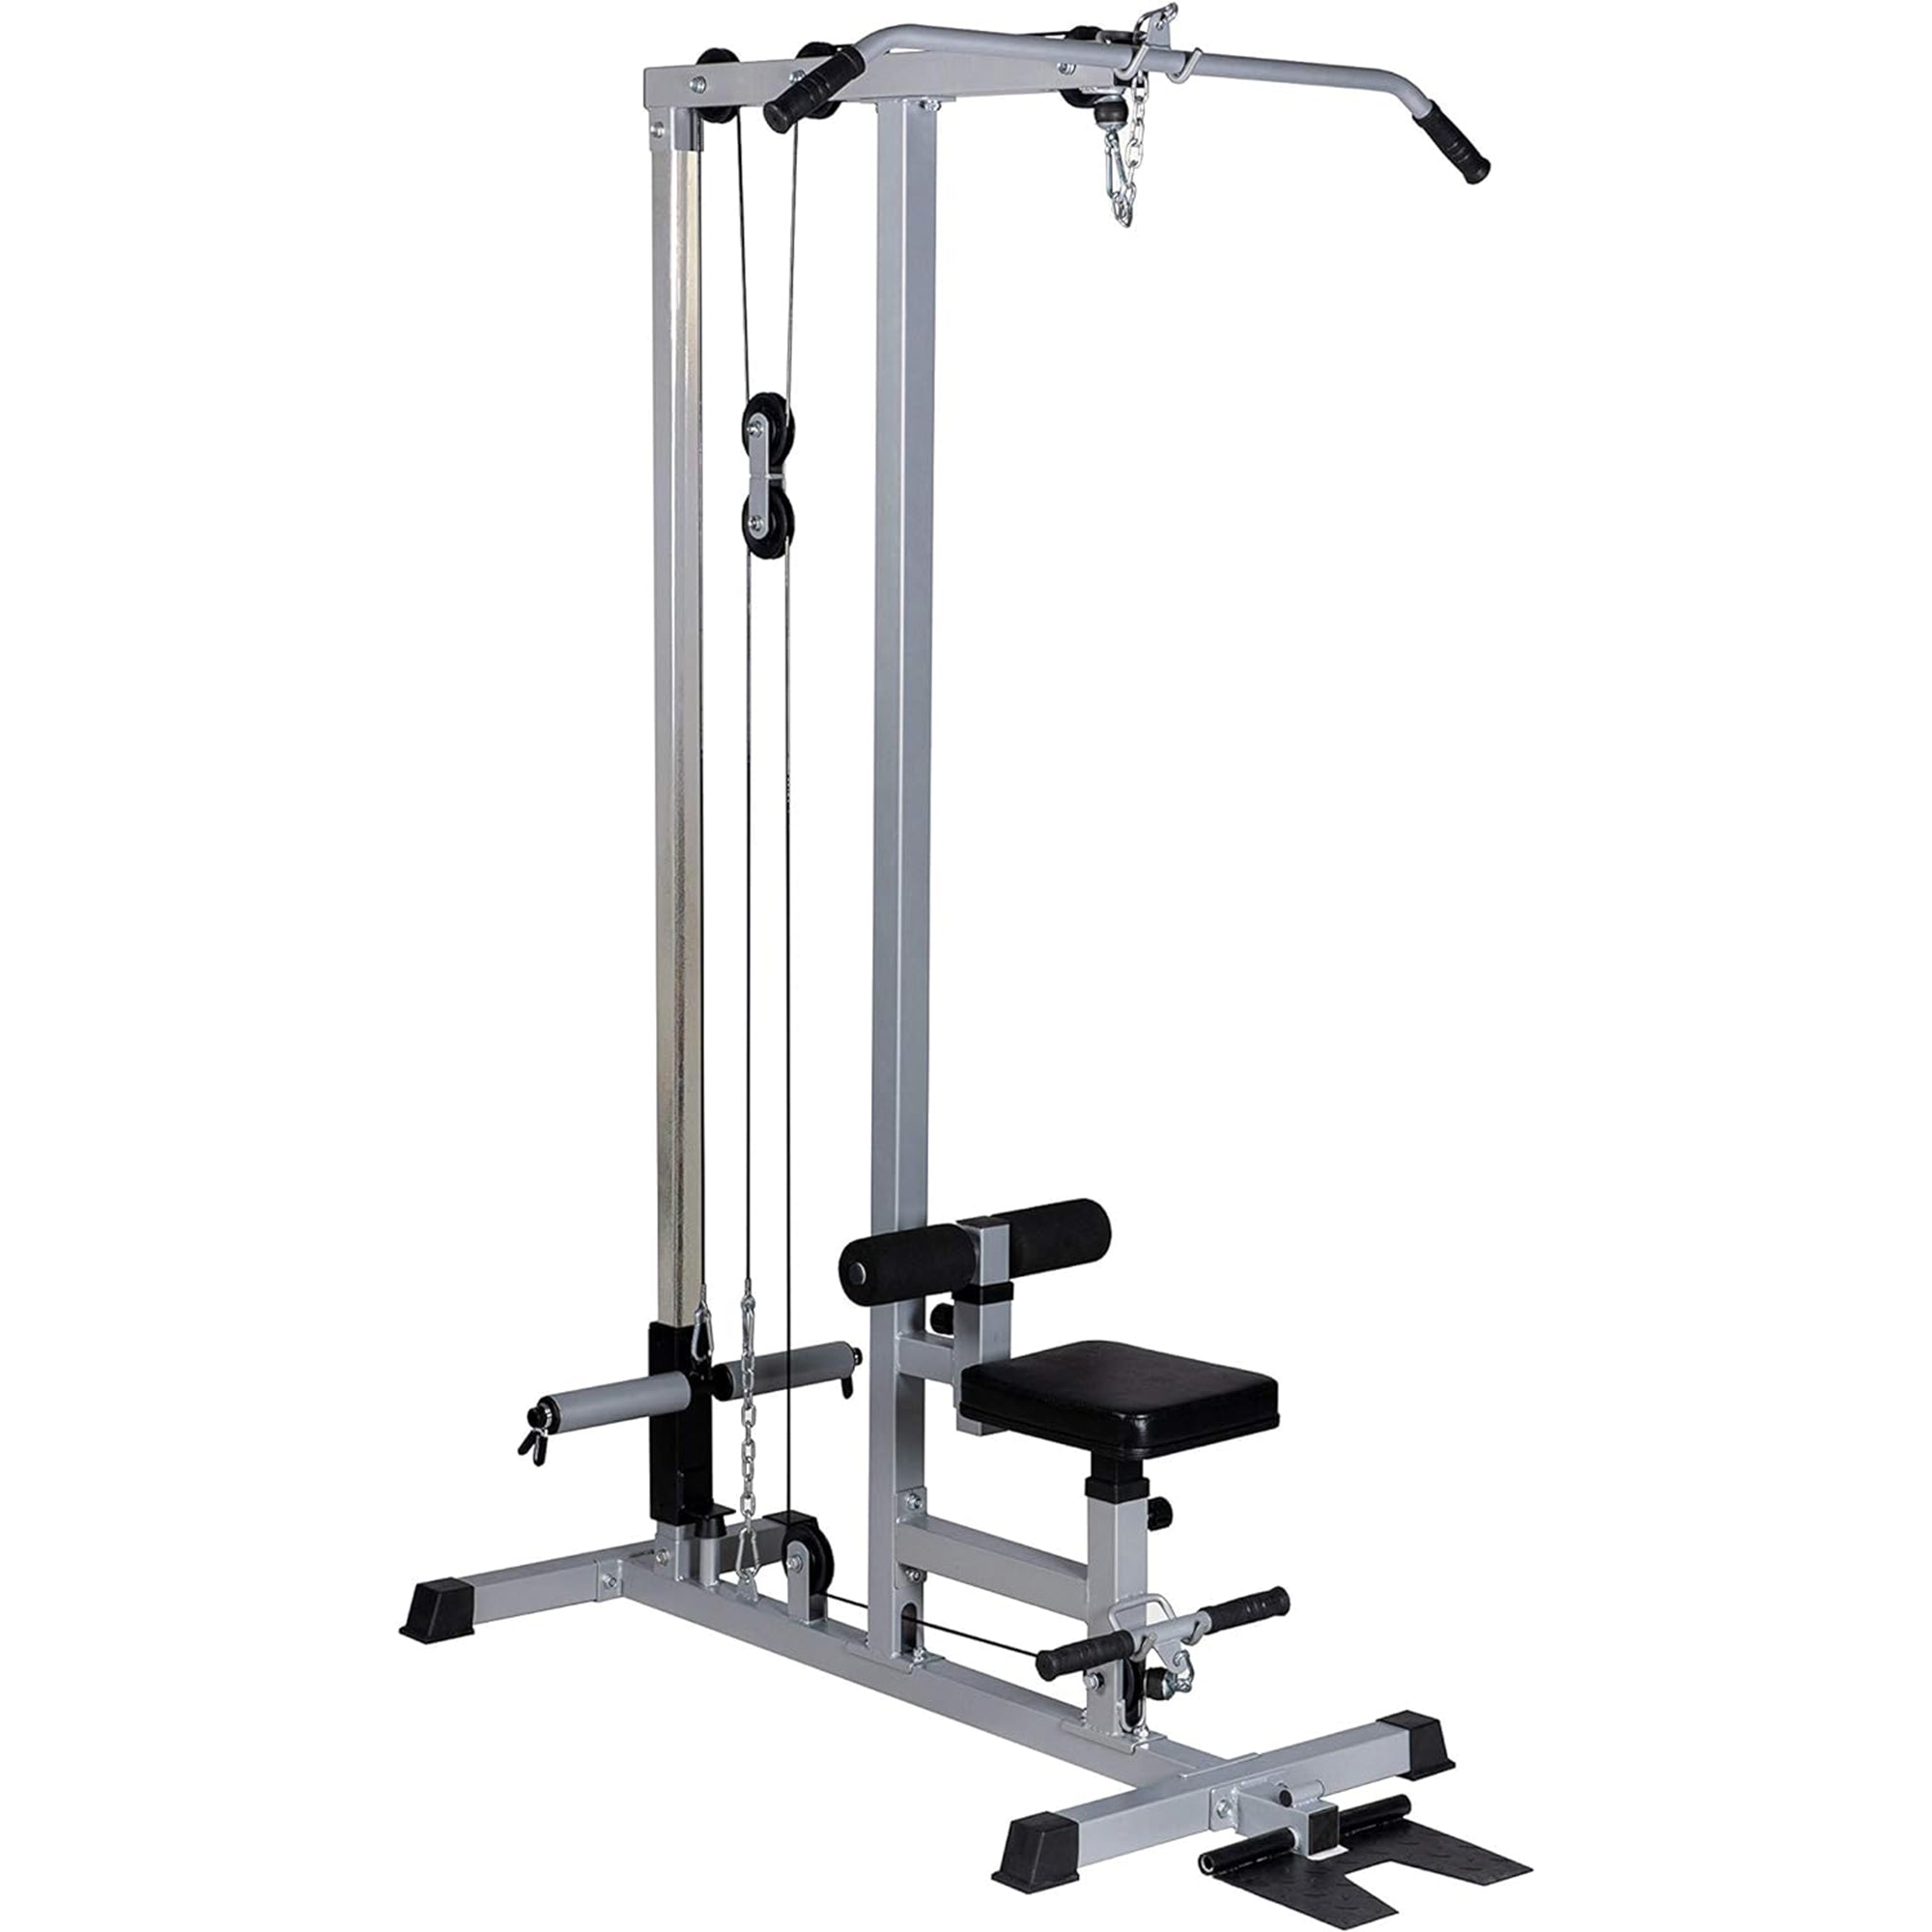 Yesoul Lat Pull Down